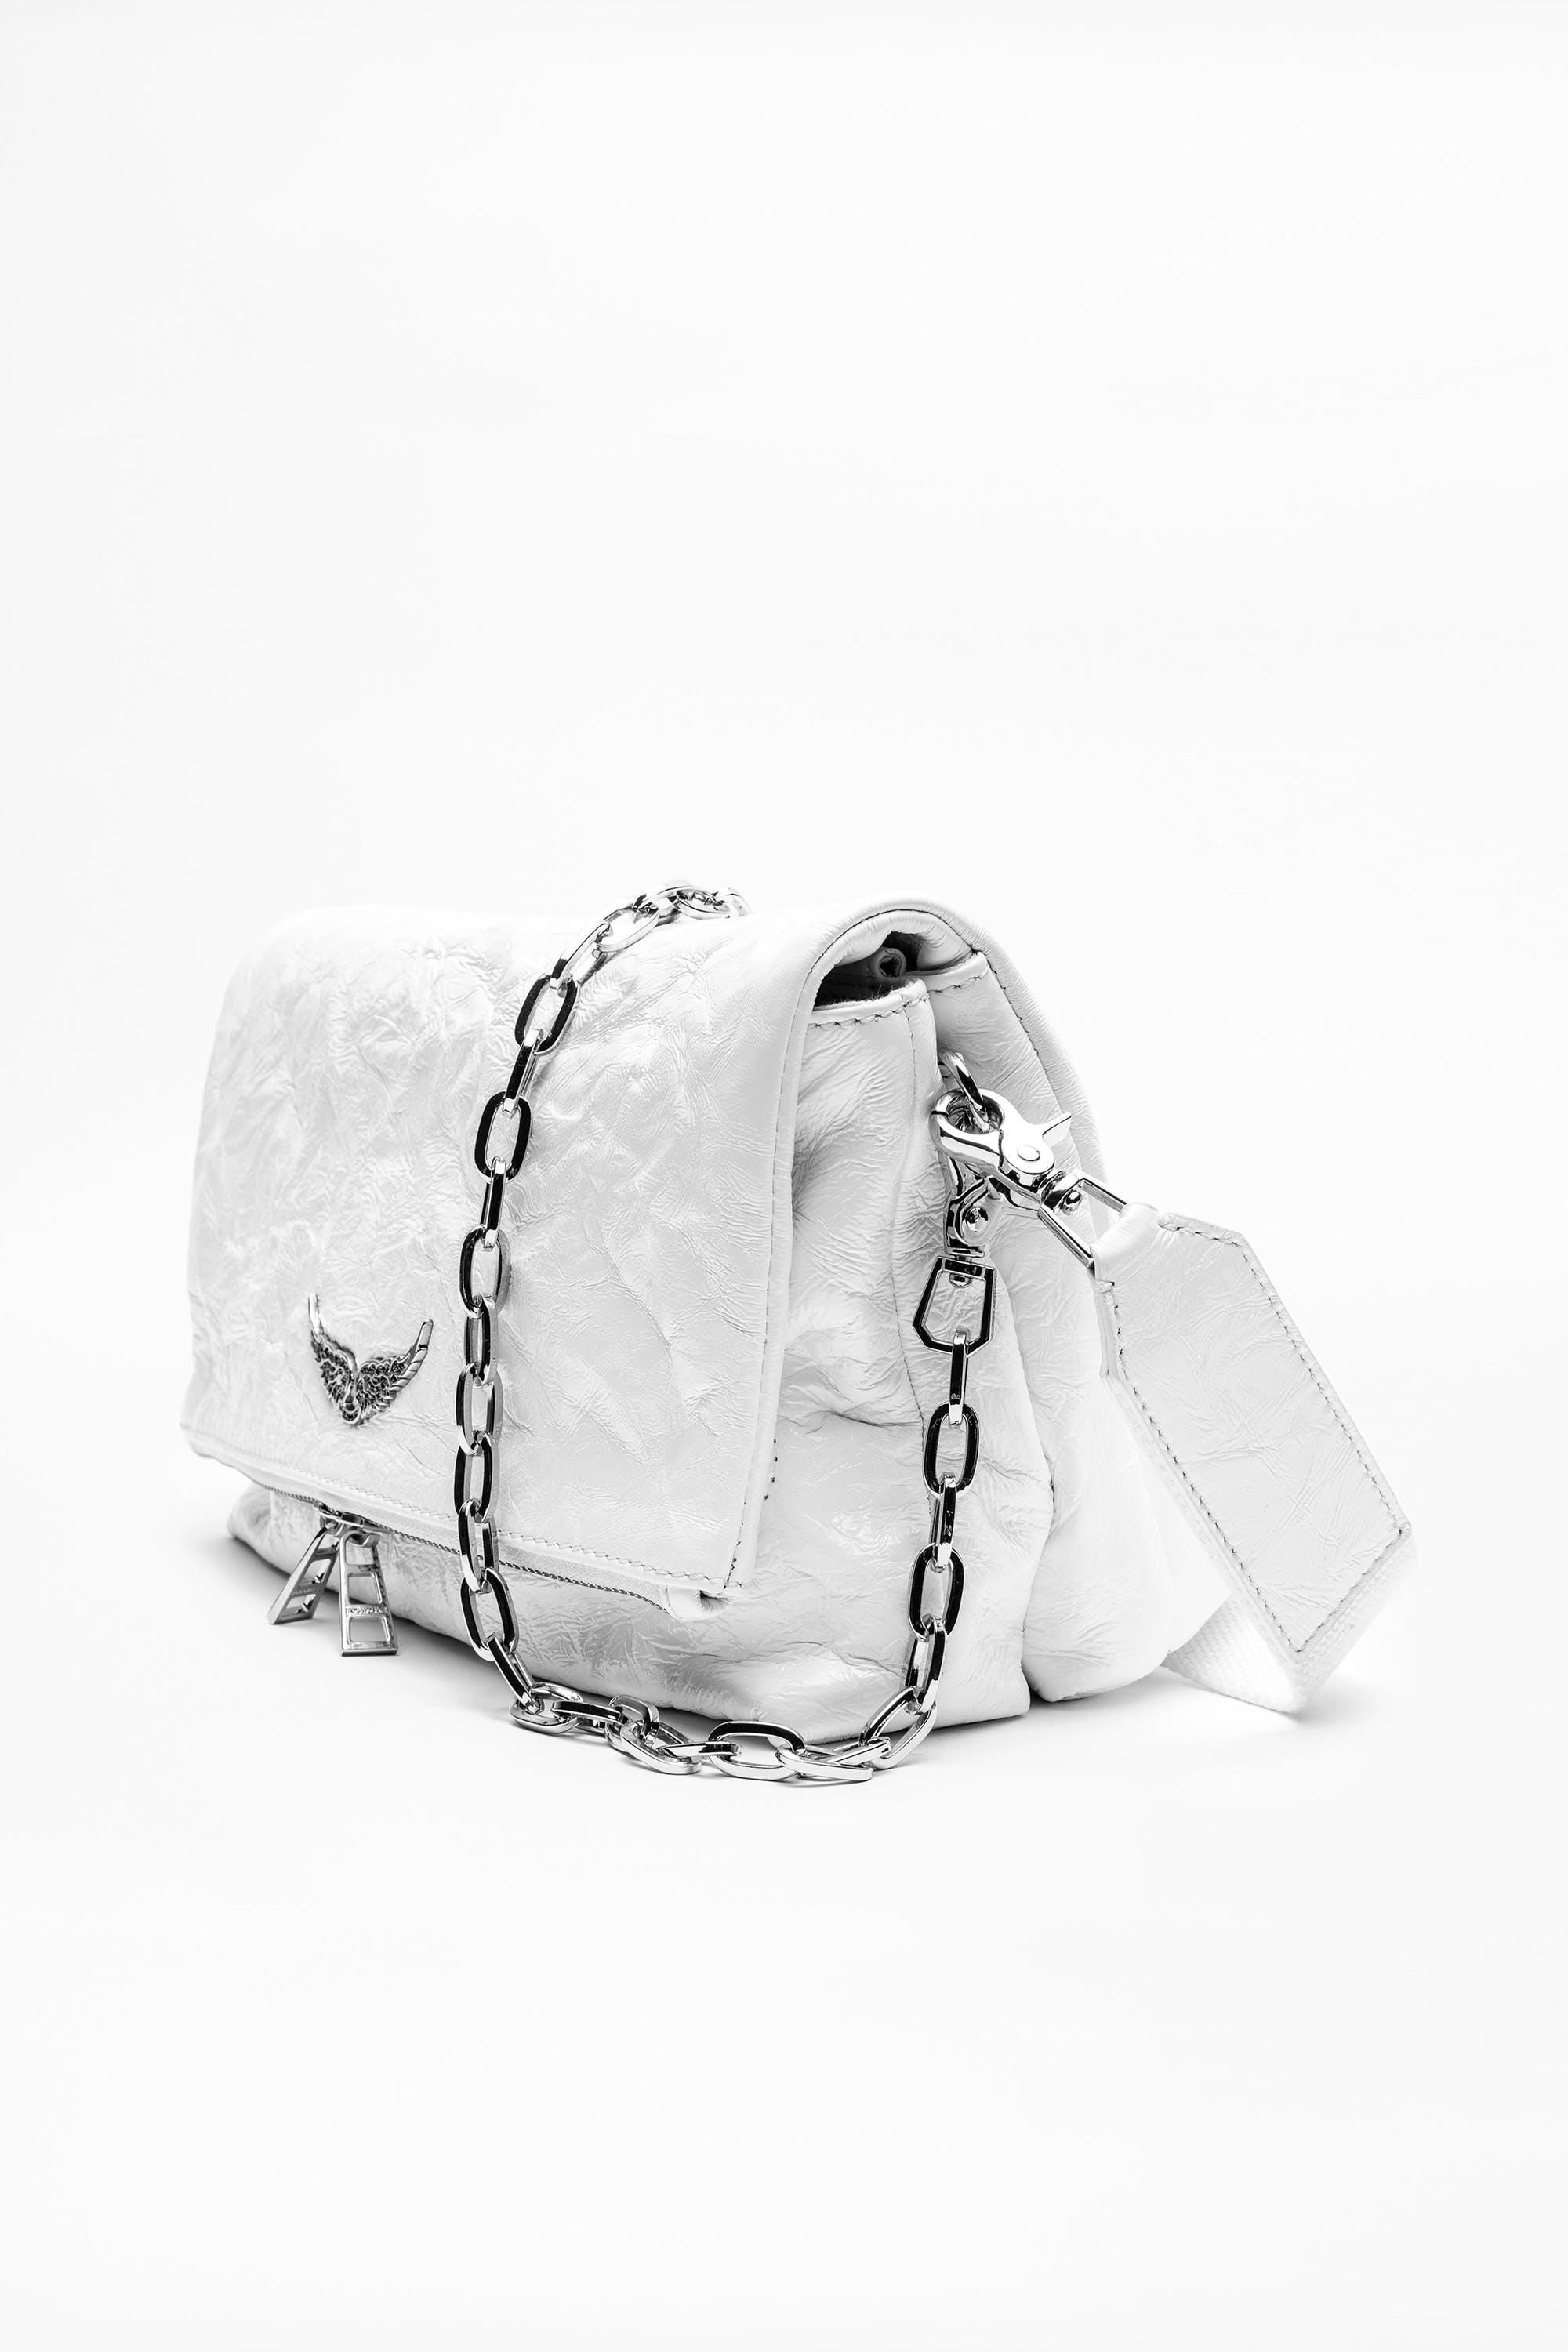 Zadig & Voltaire Rocky Crinkle Leather Crossbody Bag in White | Lyst